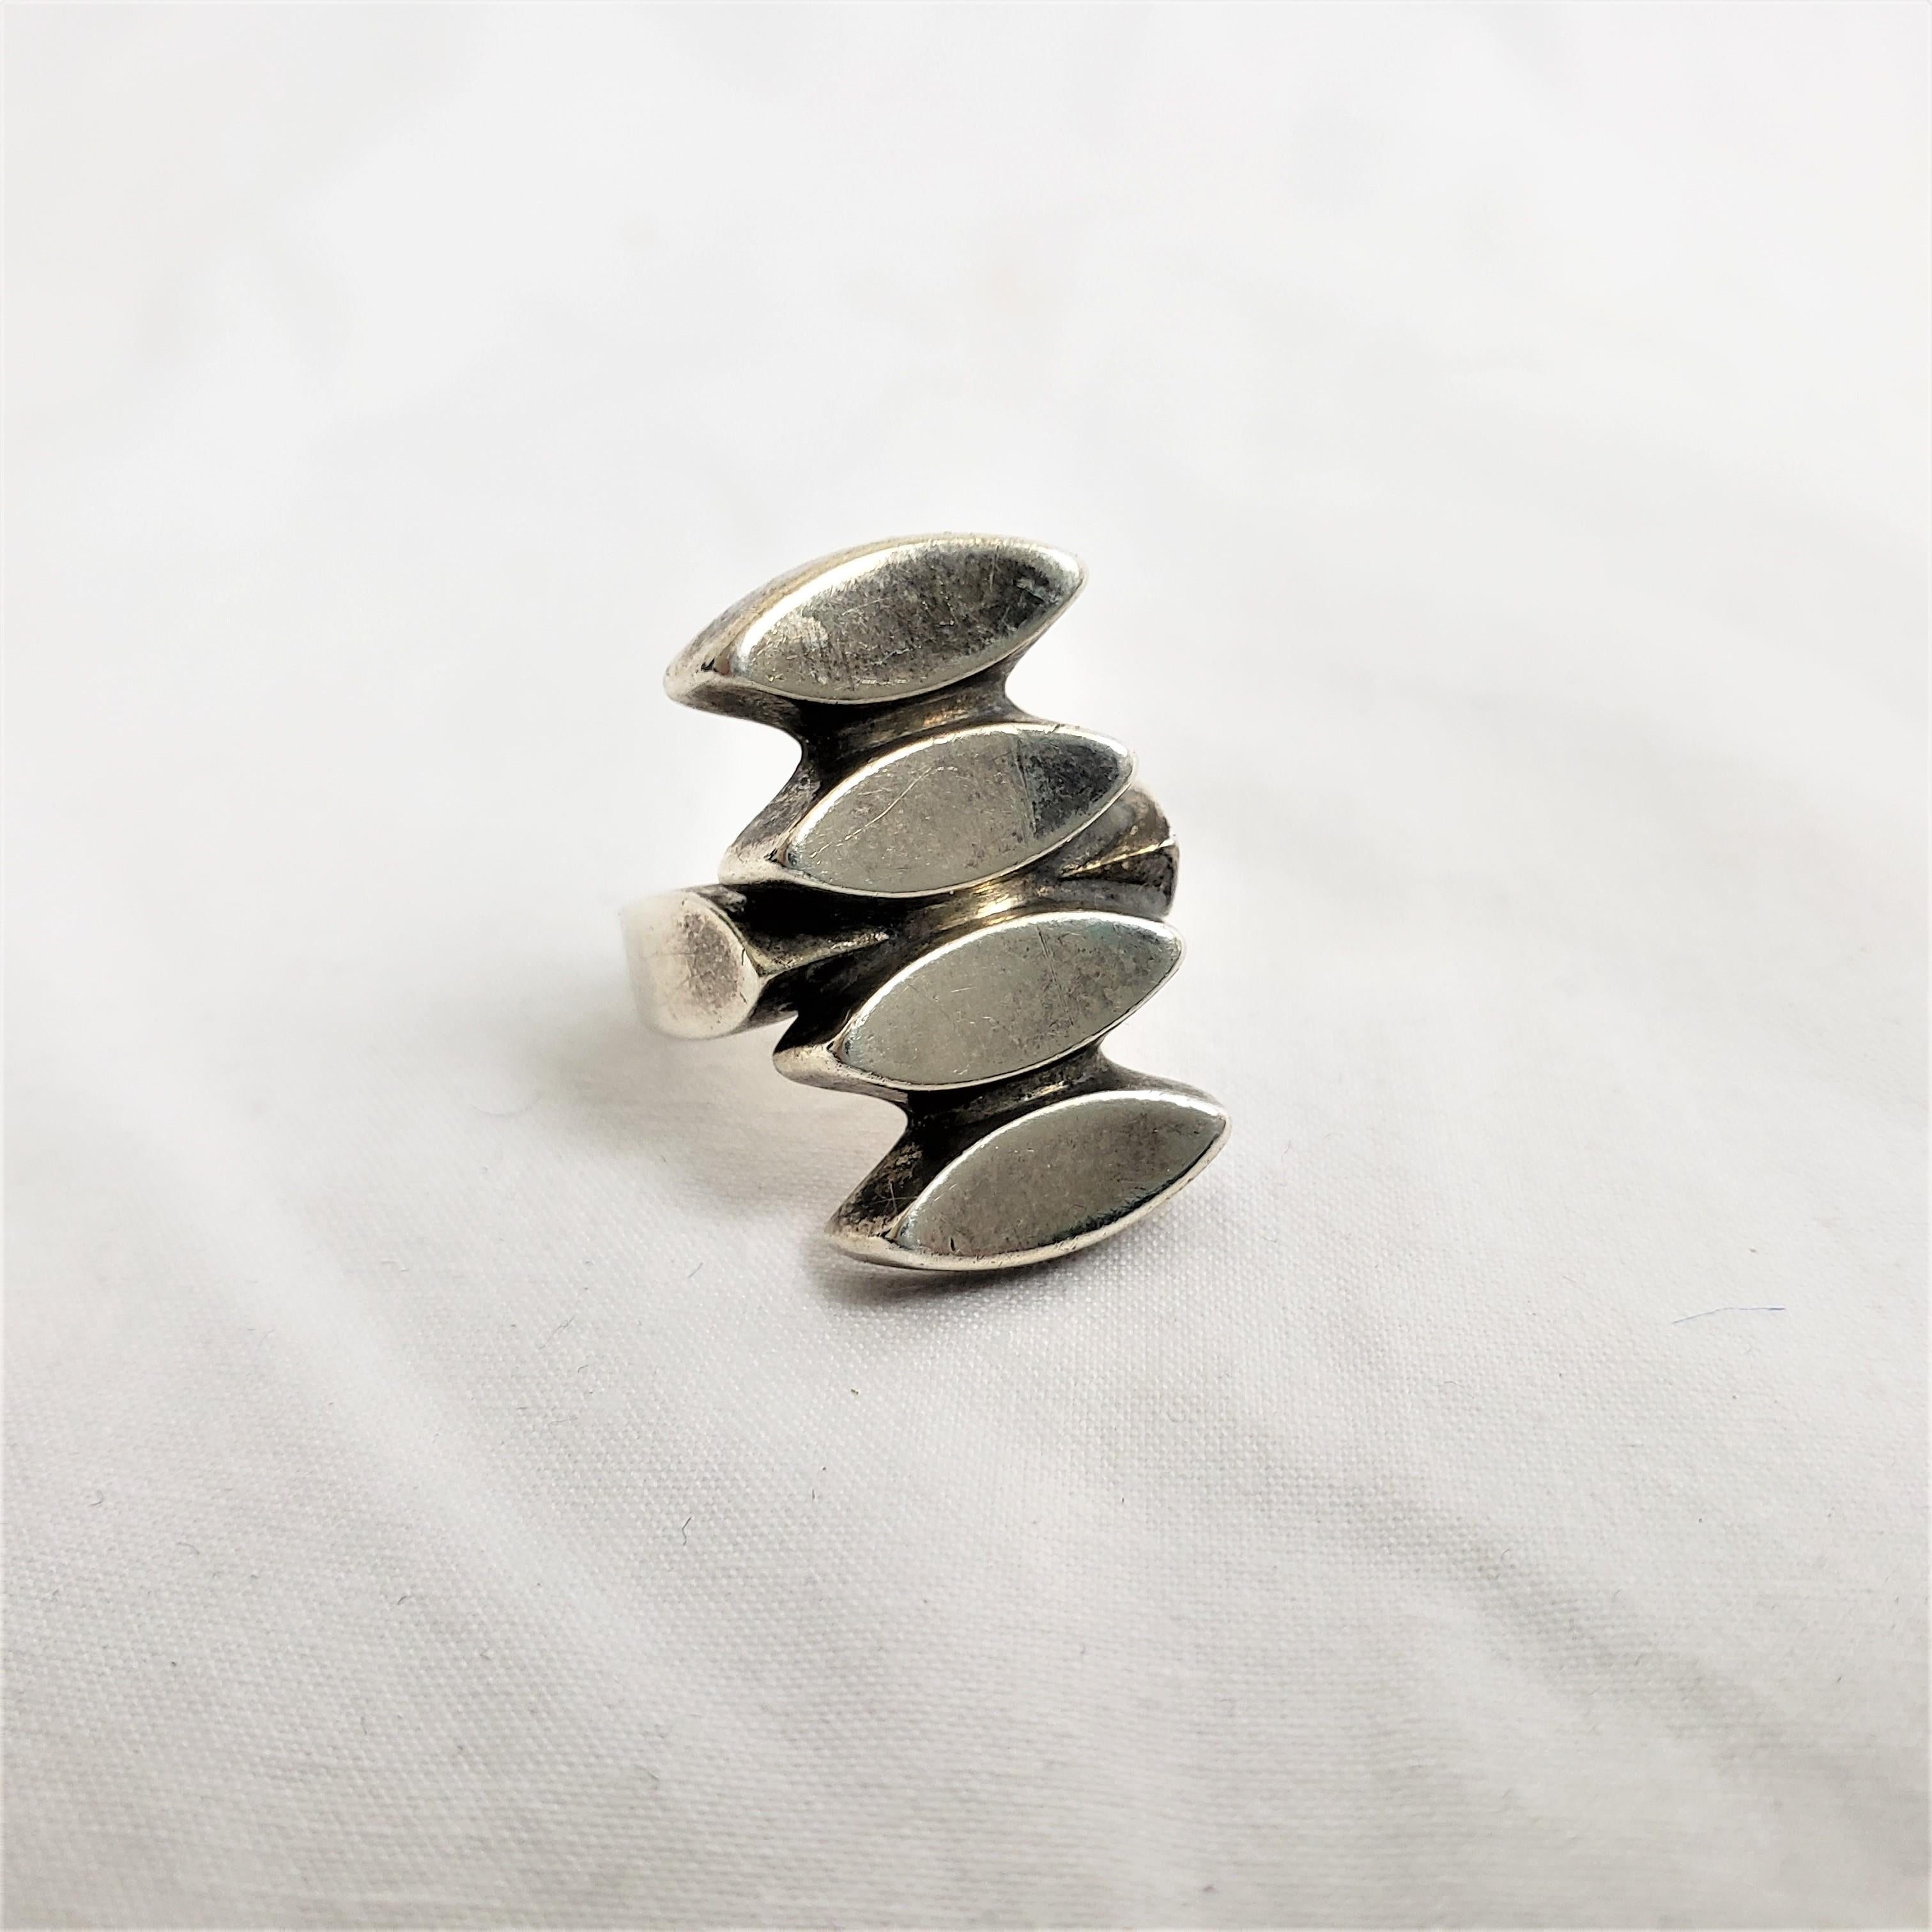 This ladies ring was made by the renowned Georg Jensen of Denmark in approximately 1920 in his period Art Deco style. The ring is composed of sterling silver and done with a geometric design. The rign is clearly signed with Geprg Jensen maker's